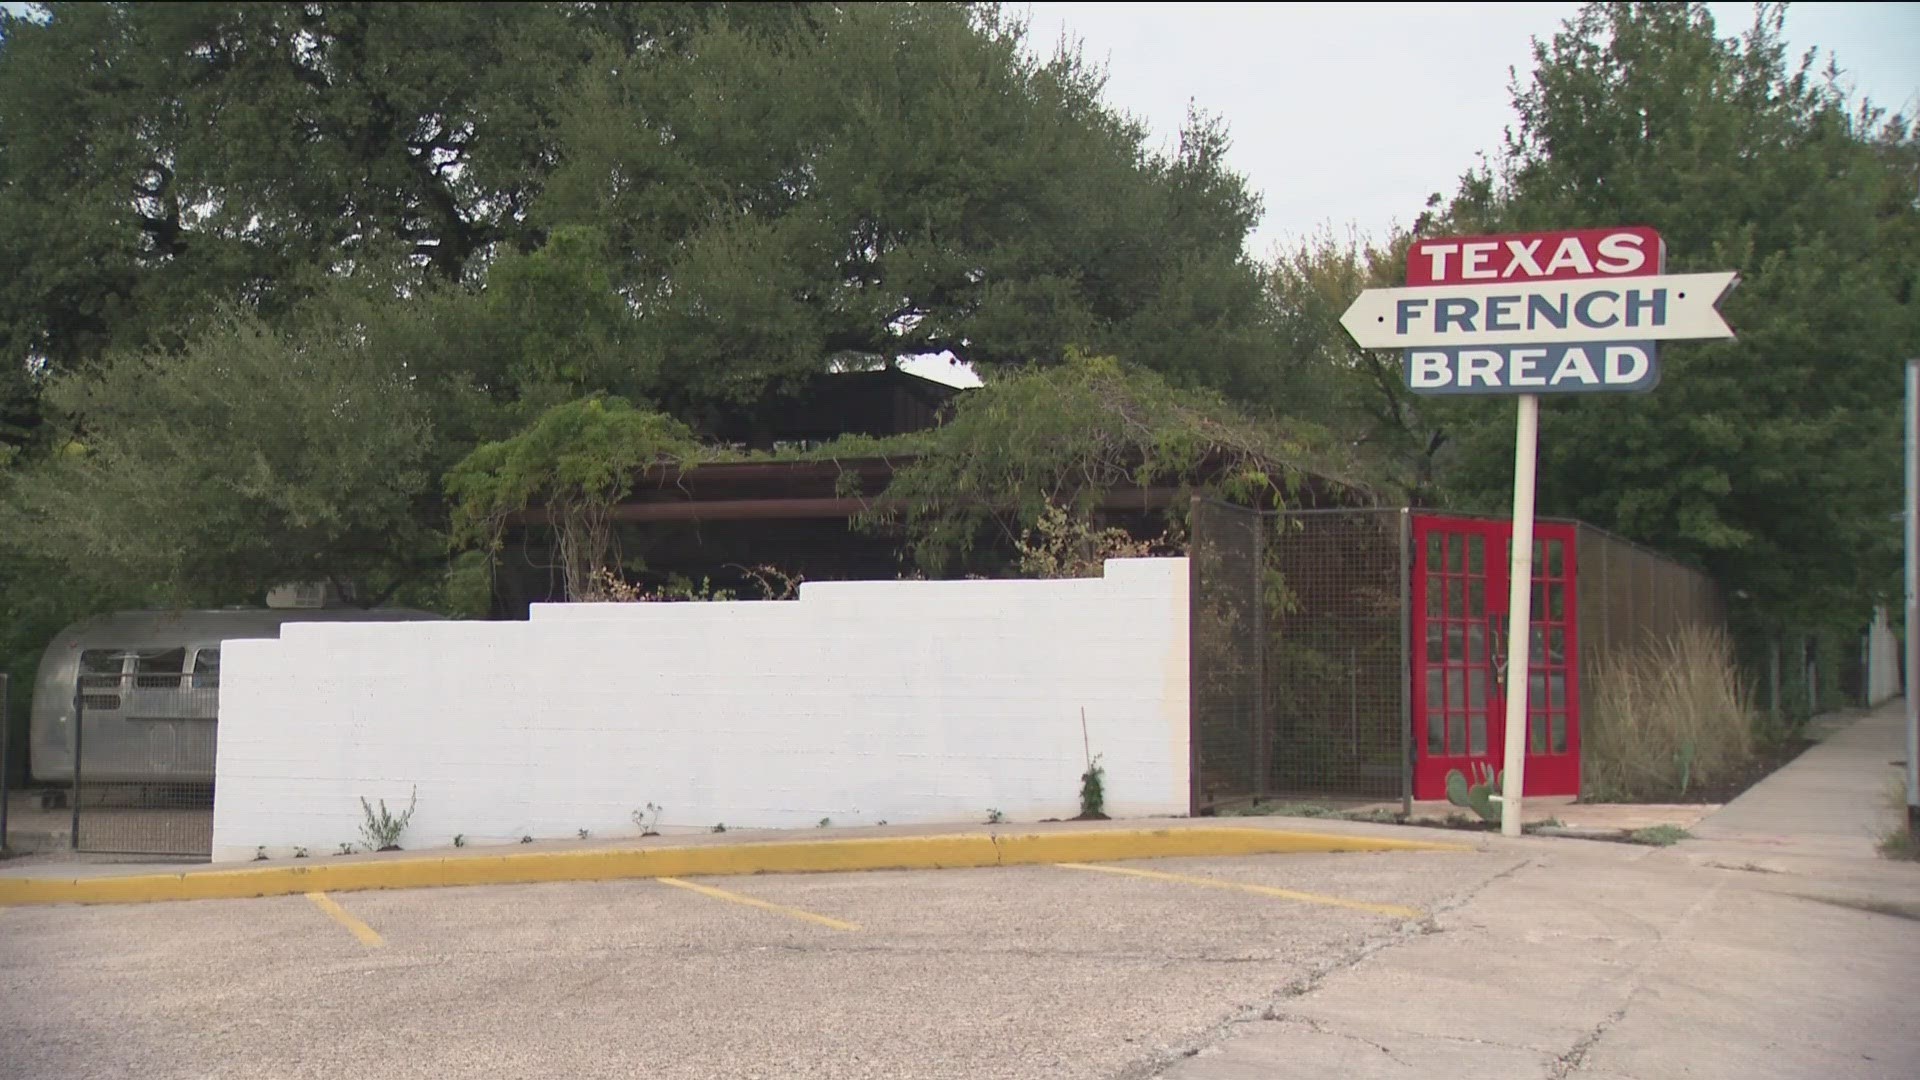 Texas French Bread is still on the road to recovery after a fire destroyed the bakery in 2022.